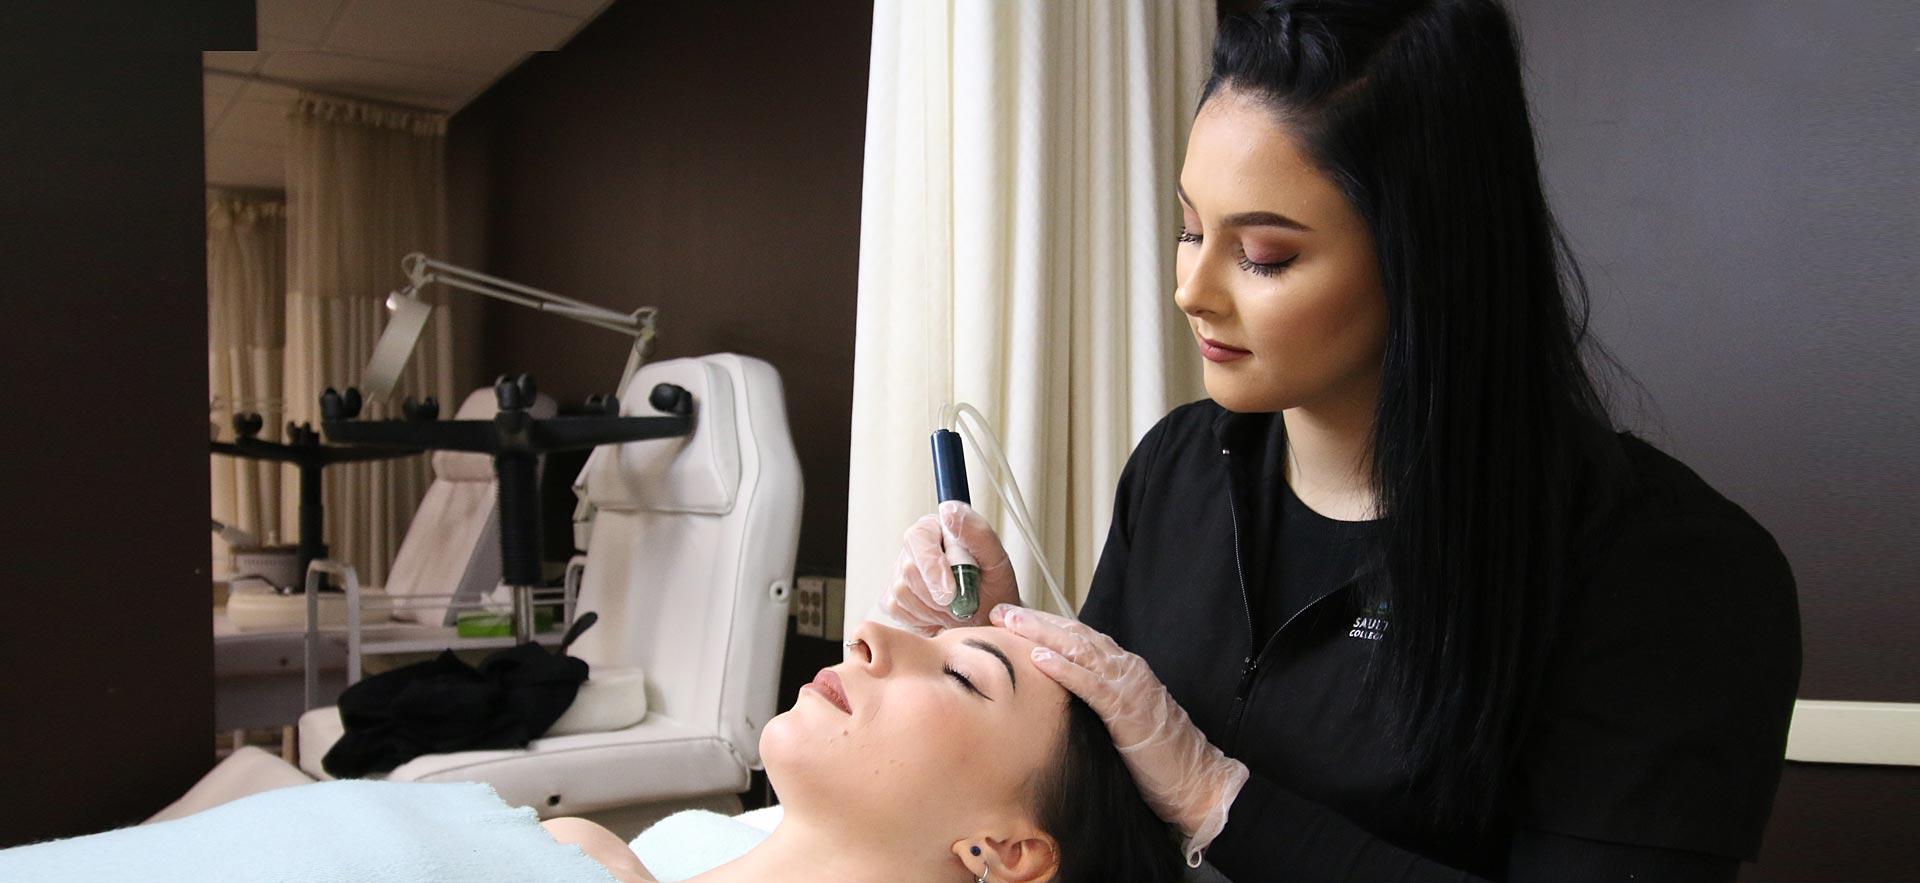 One female Esthetician student applies a skin treatment to another student in the Sault College salon spa.